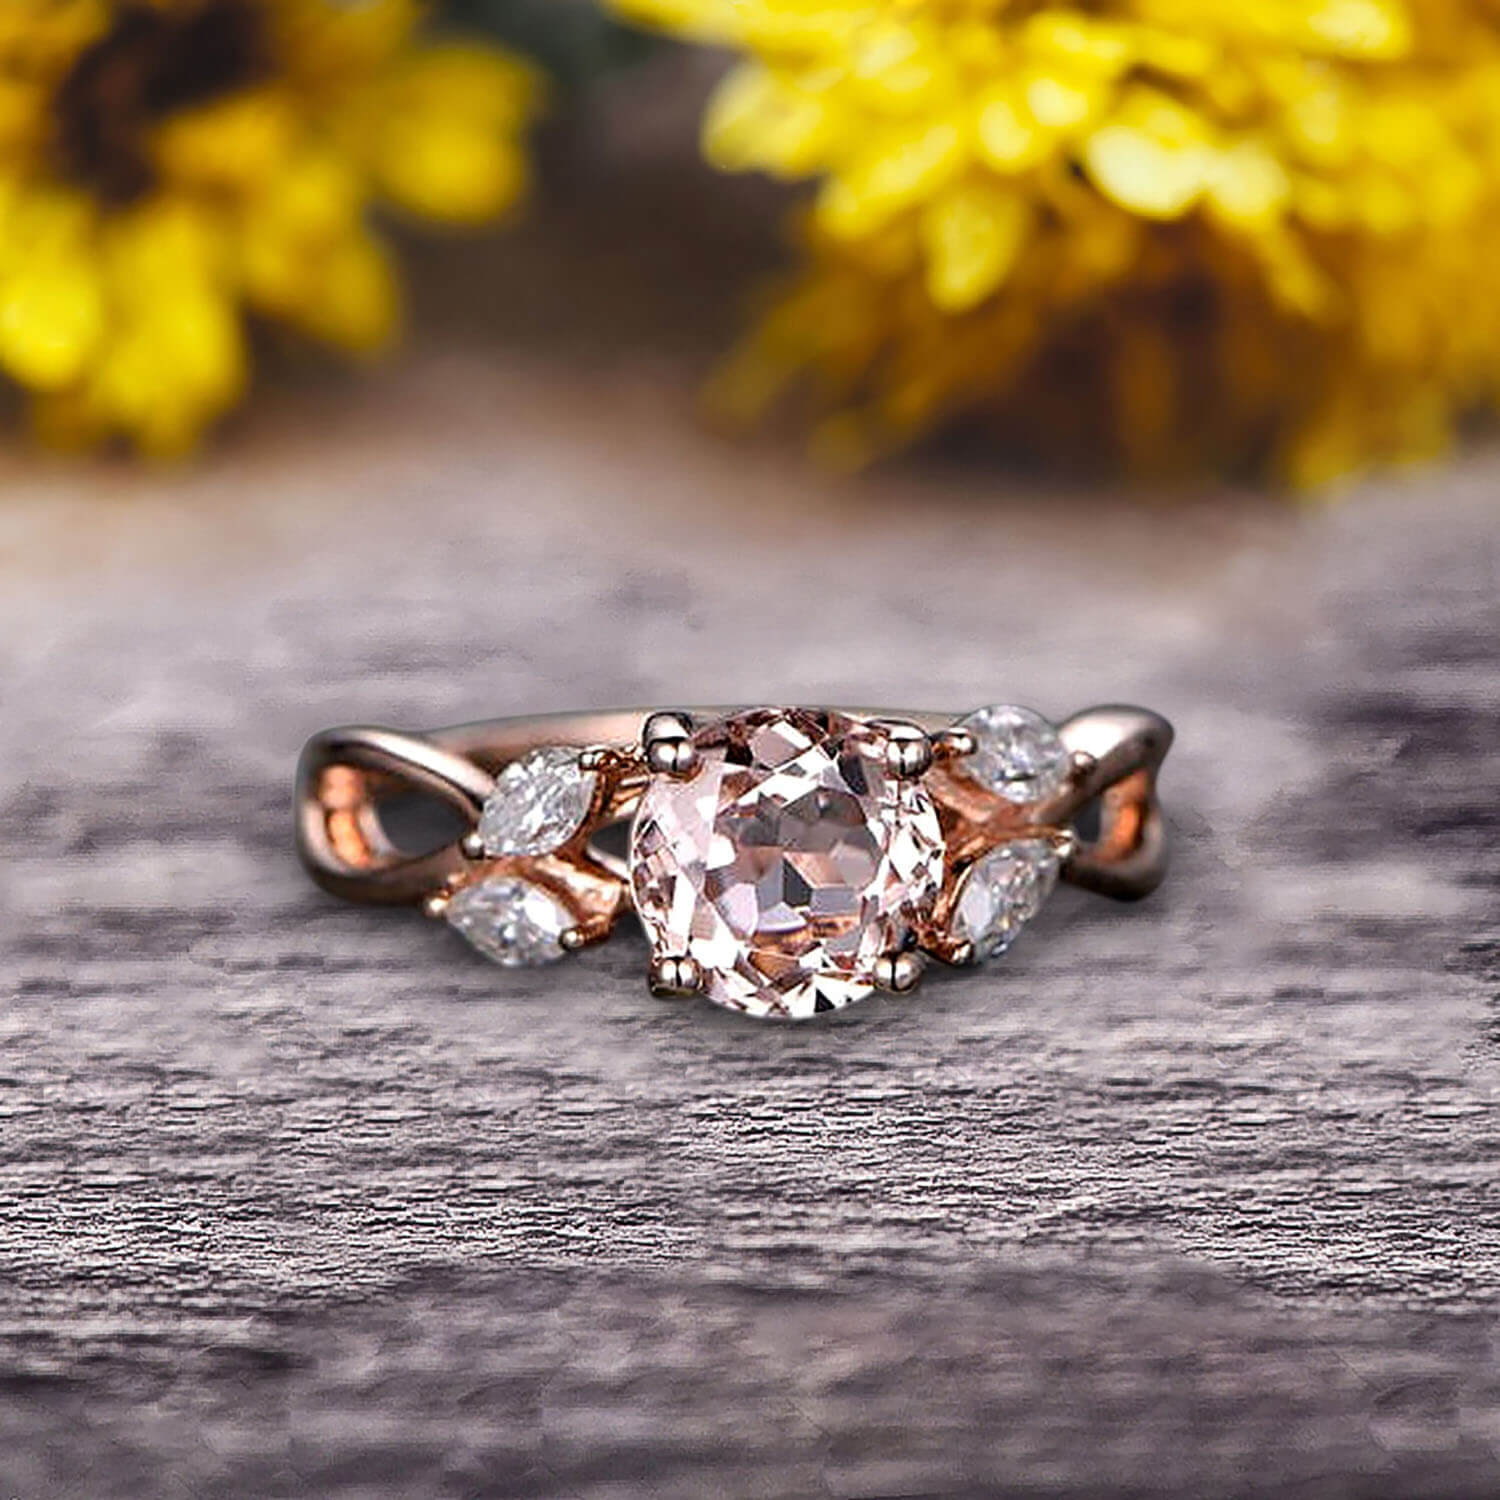 Jeen Jewels Surprisingly 1.25 ct Round Cut Morganite Engagement Ring On 10k Rose Gold Moissanite Ring Promise Ring Art Deco Anniversary Gift